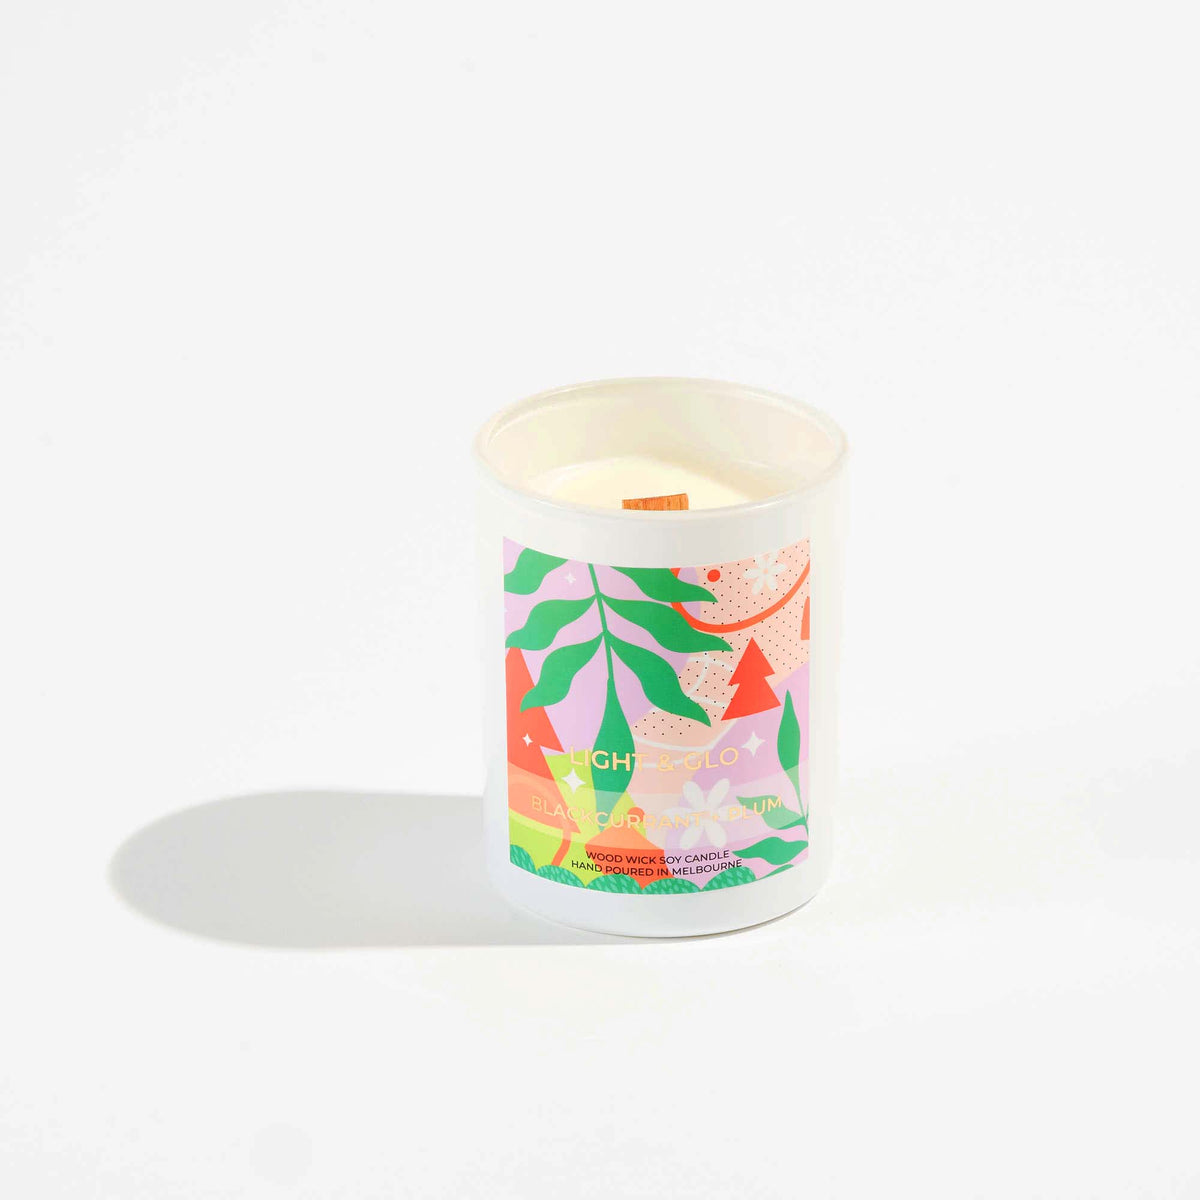 Christmas Candle - Black Currant &amp; Plum | Luxury Candles &amp; Home Fragrances by Light + Glo